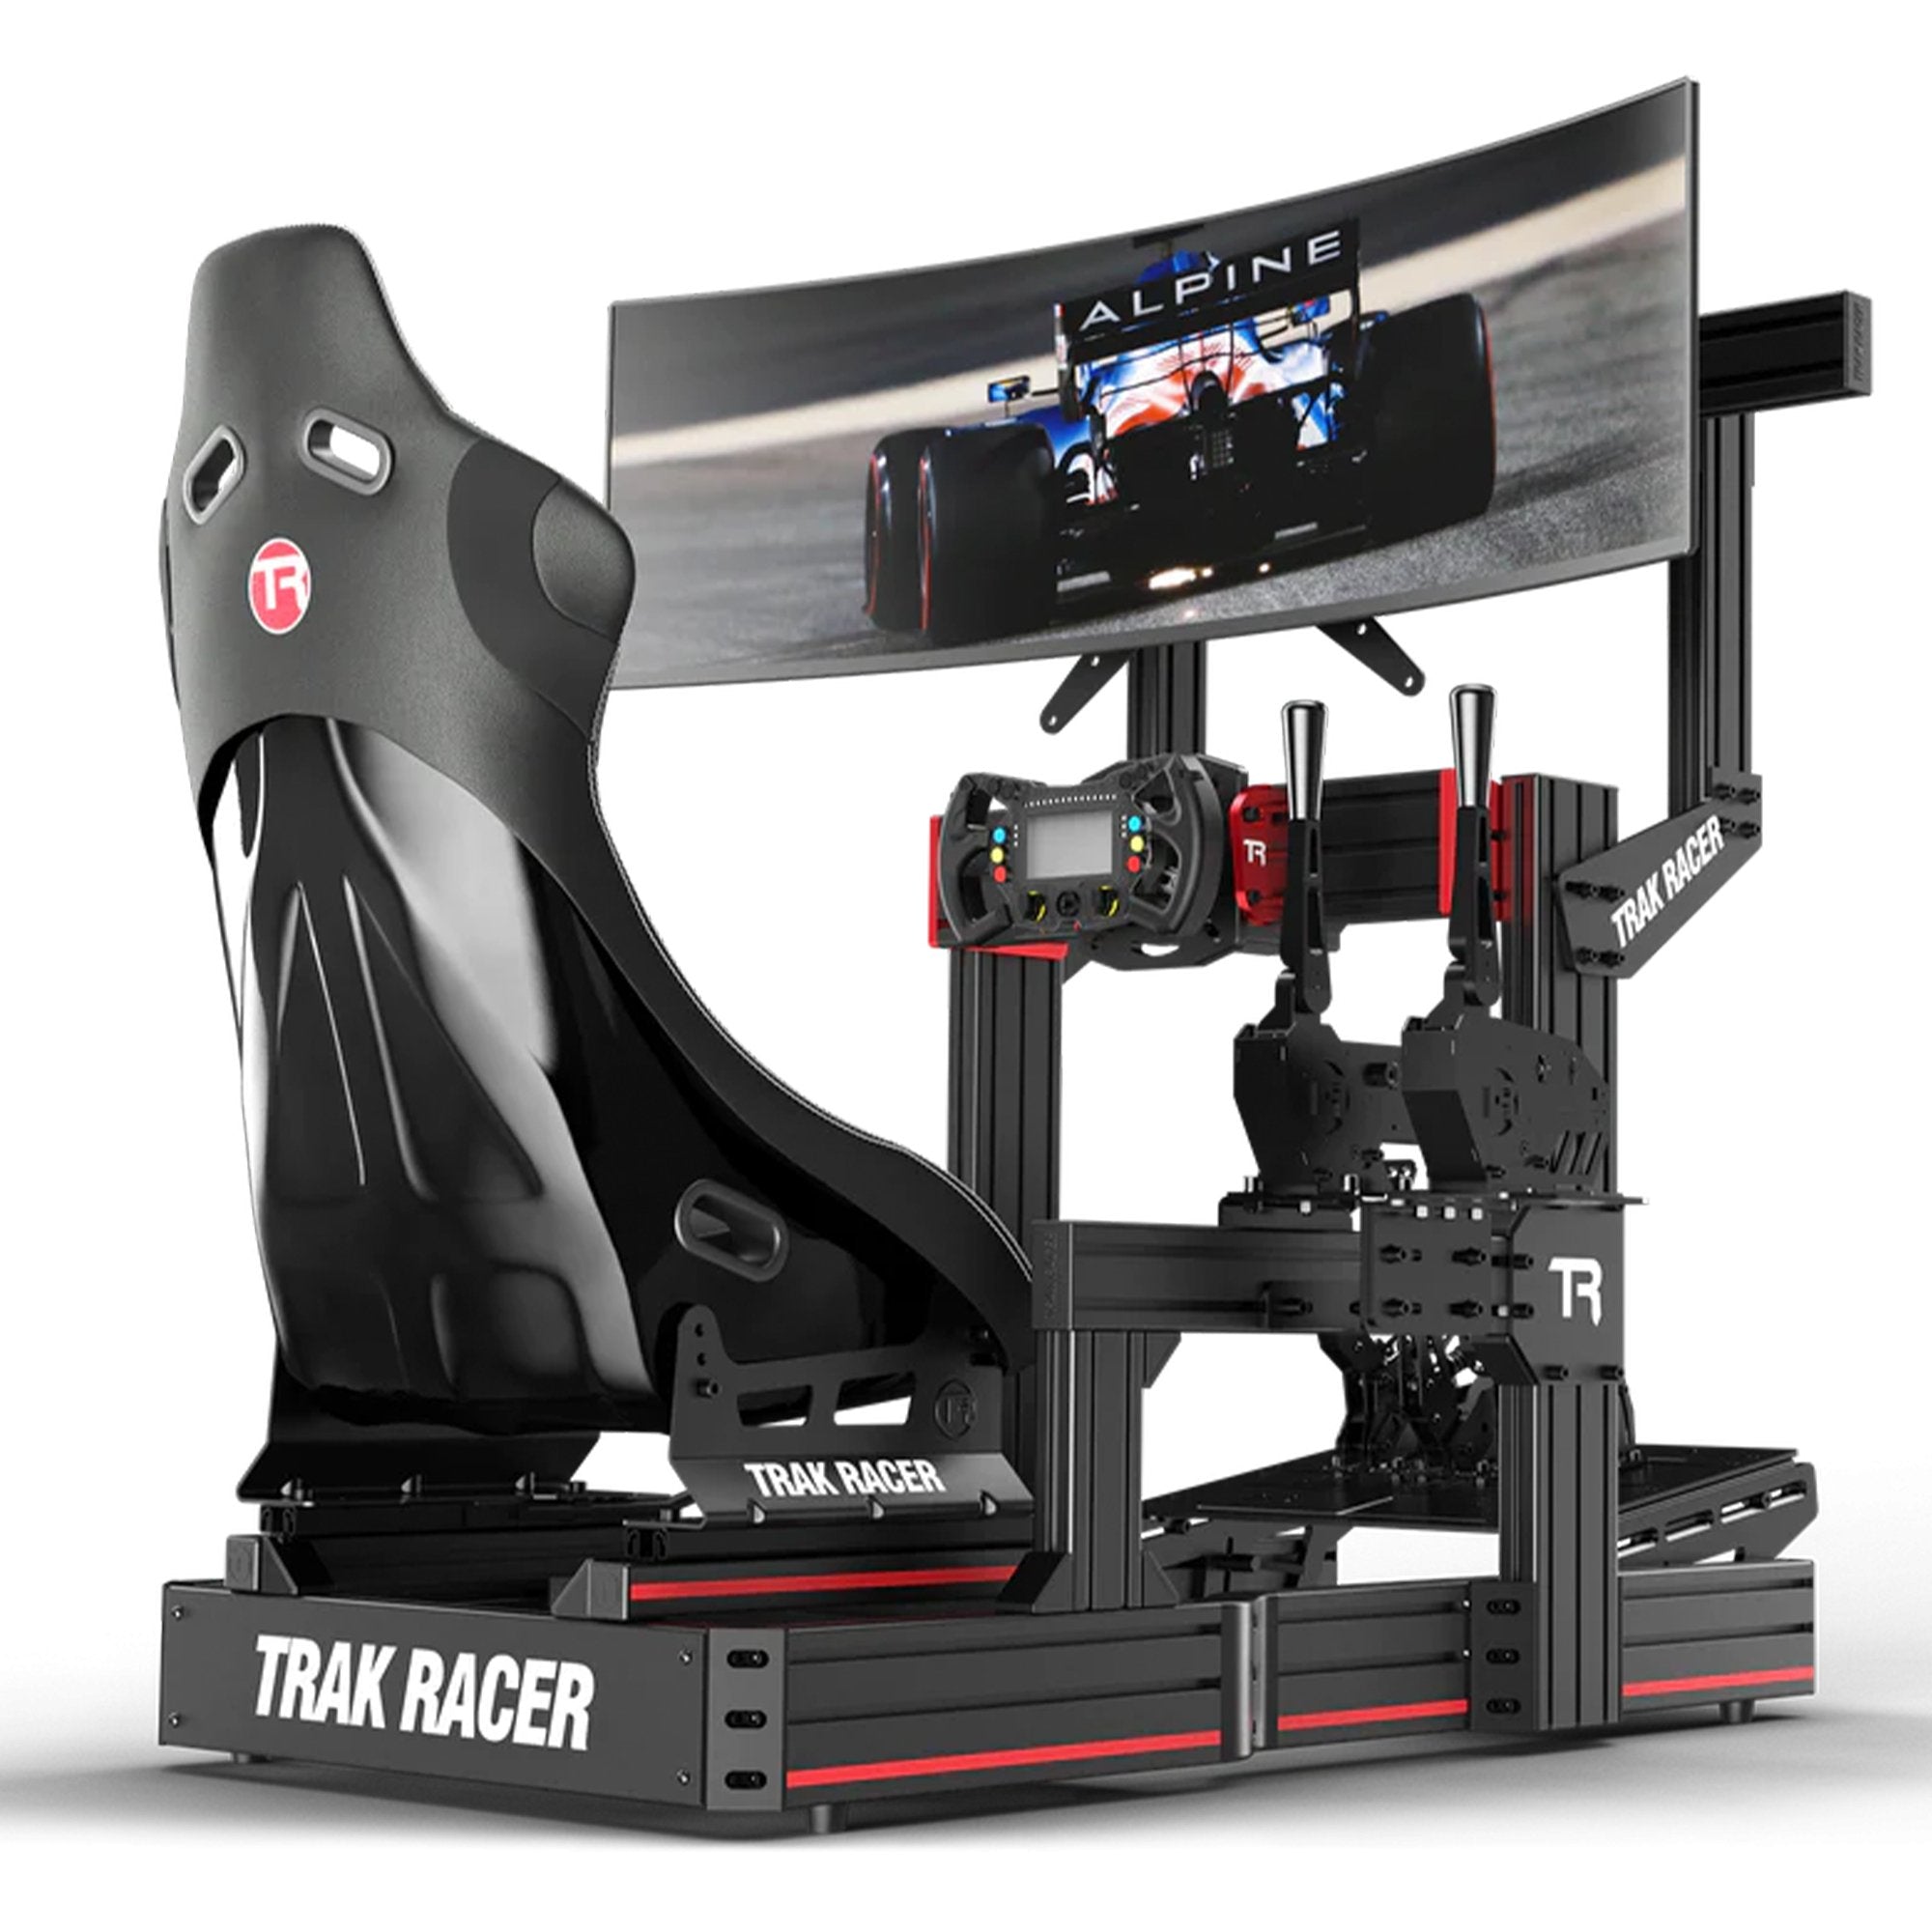 Monitor or TV holder up to 45" for Trak Racer 800 mm cockpits - TV and monitor stands